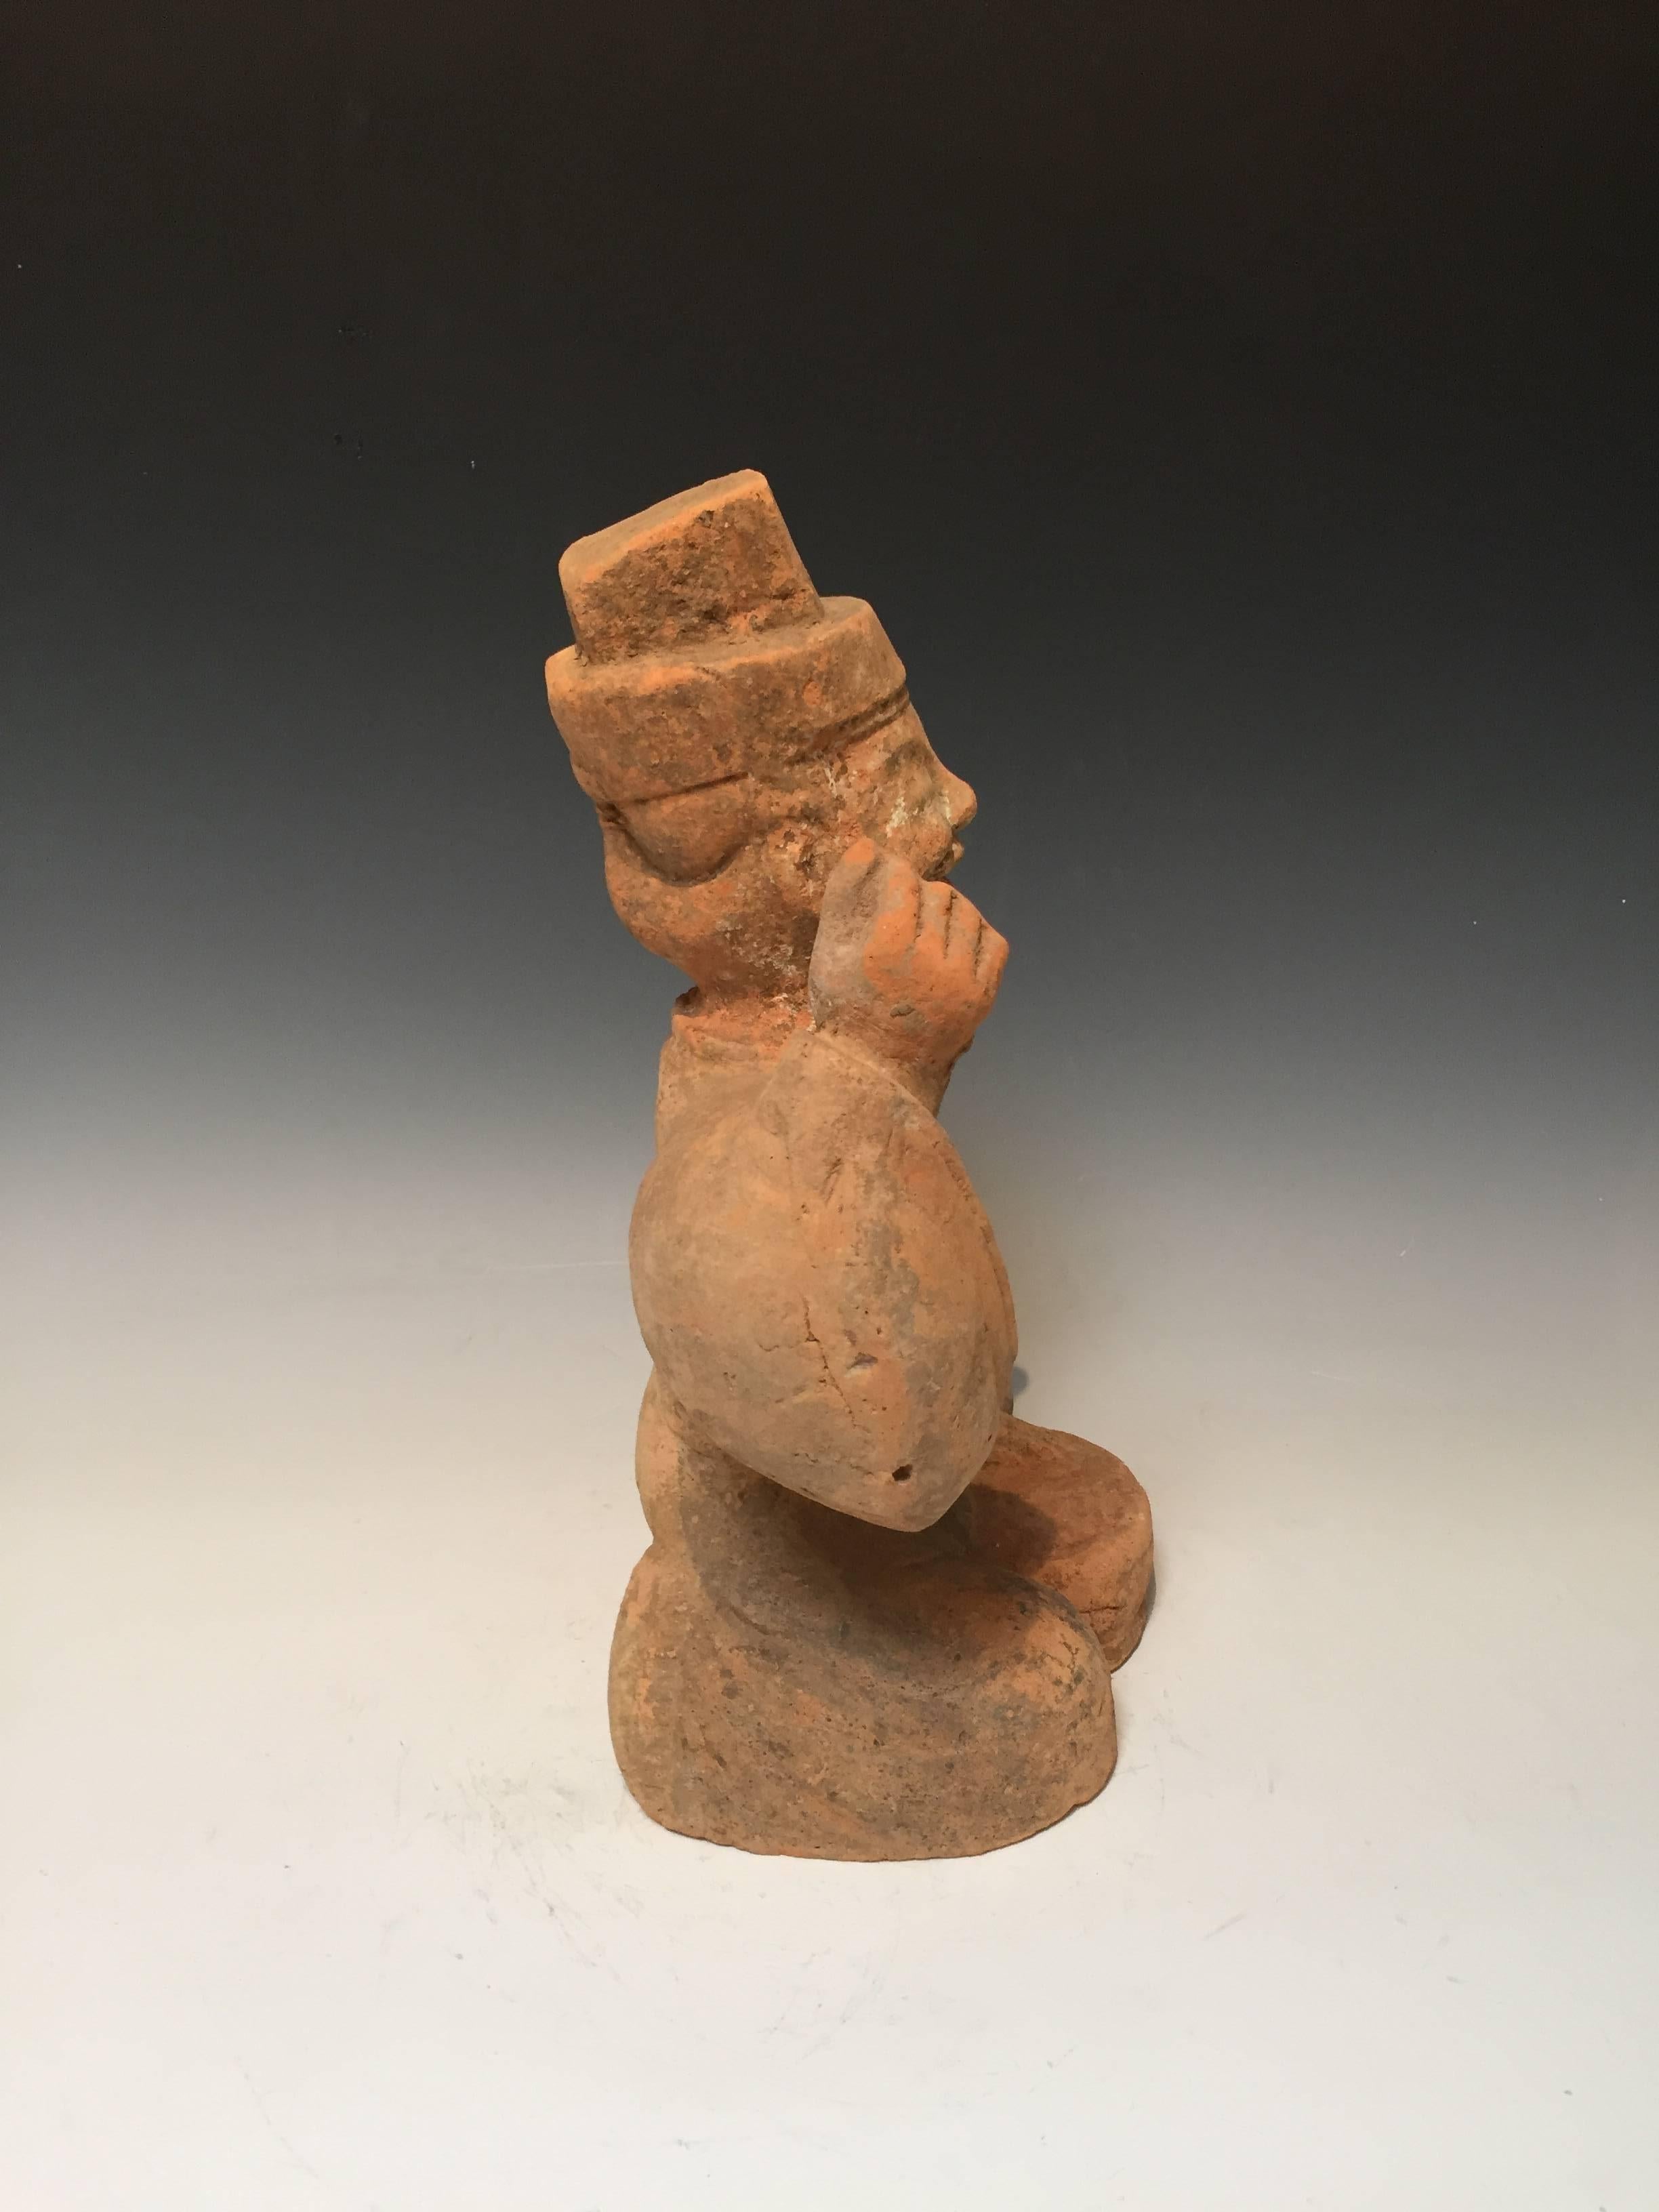 Pottery musician from the Han dynasty (Sechuan style).
Entertainers were often memorialized, ranging from dancers, drummers, story tellers, etc.
This piece depicts a lively and jovial drummer and story teller.
Measure: 16